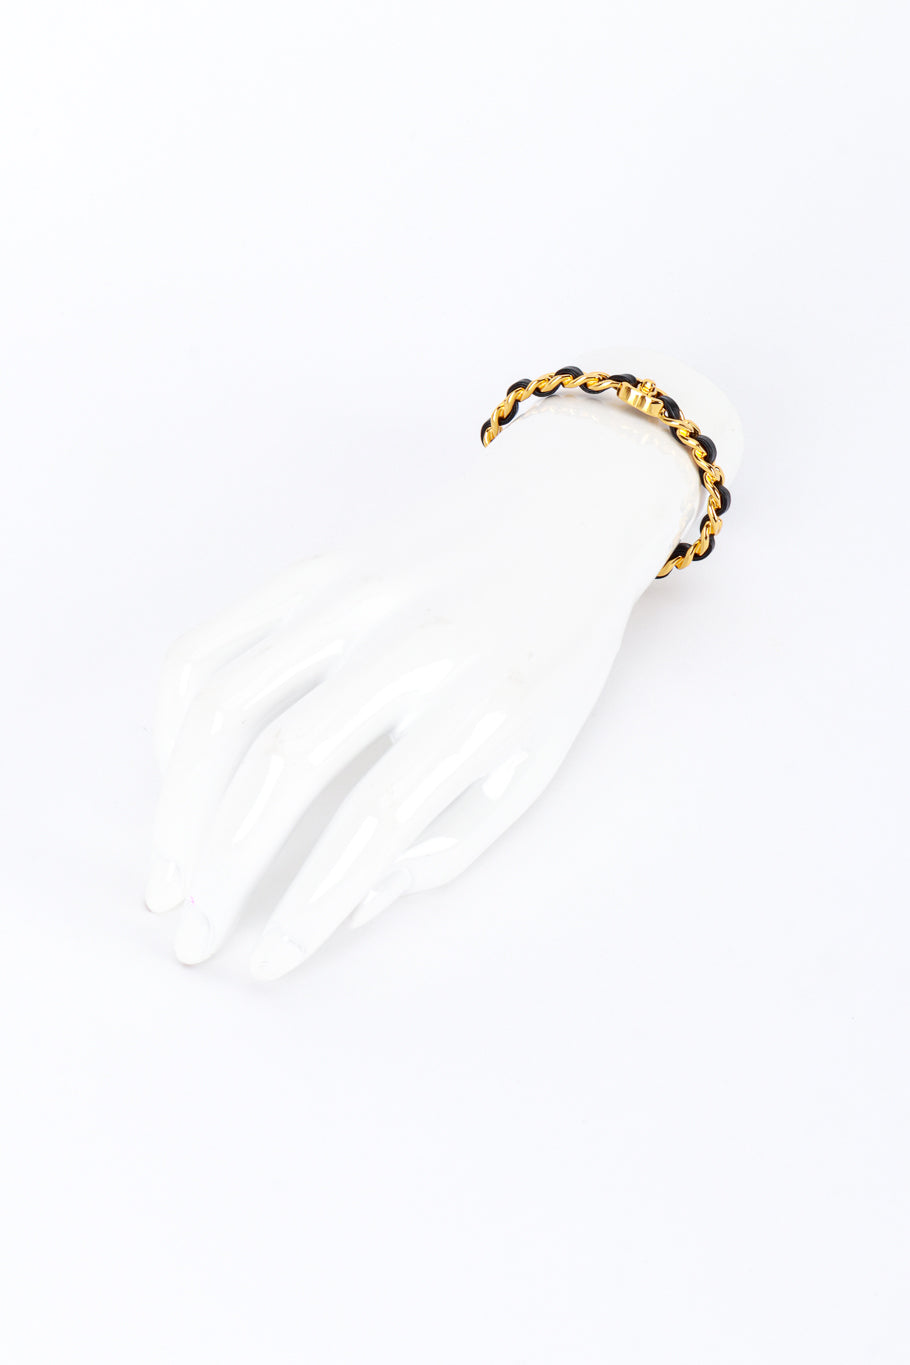 Chanel Woven Leather Chain Bangle on mannequin hand @recess la